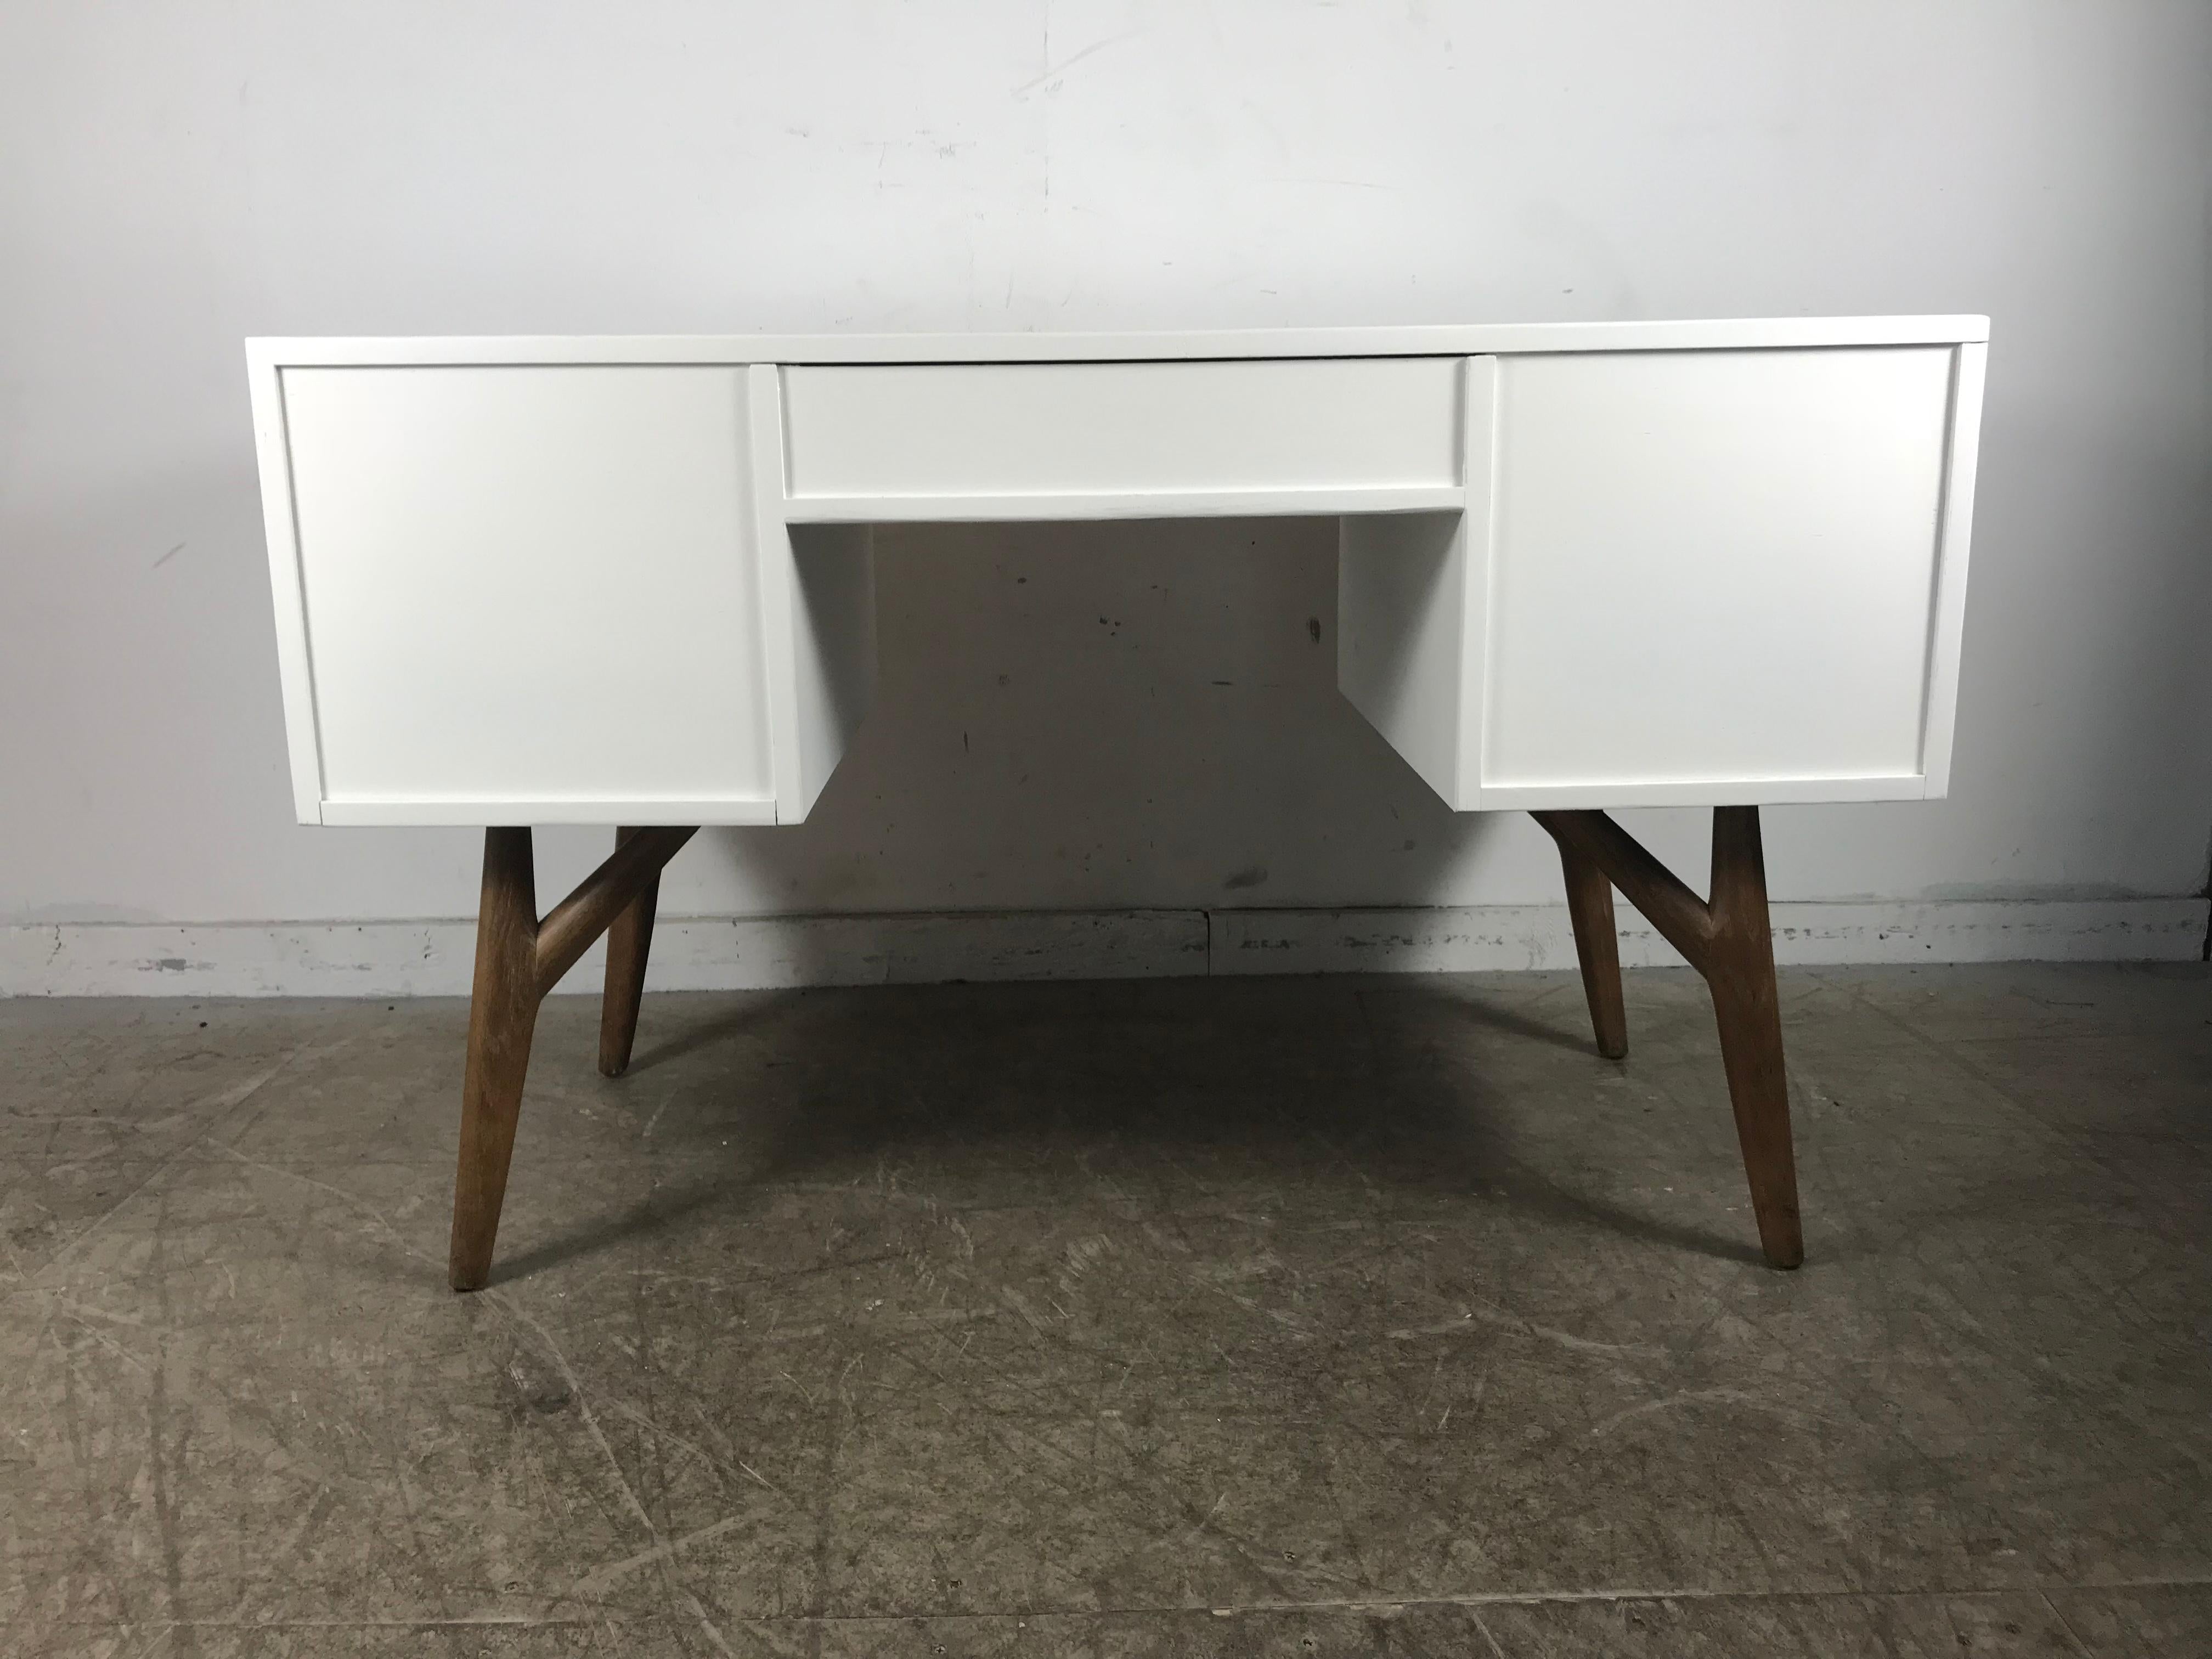 Custom 1950s white lacquer and oak desk designed by Jack Van der Molen for Jamestown Lounge. The sculptural form of this sleek desk makes it a highly functional, statement piece. Finish is lustrous, yet allows the distinct wood grain to show